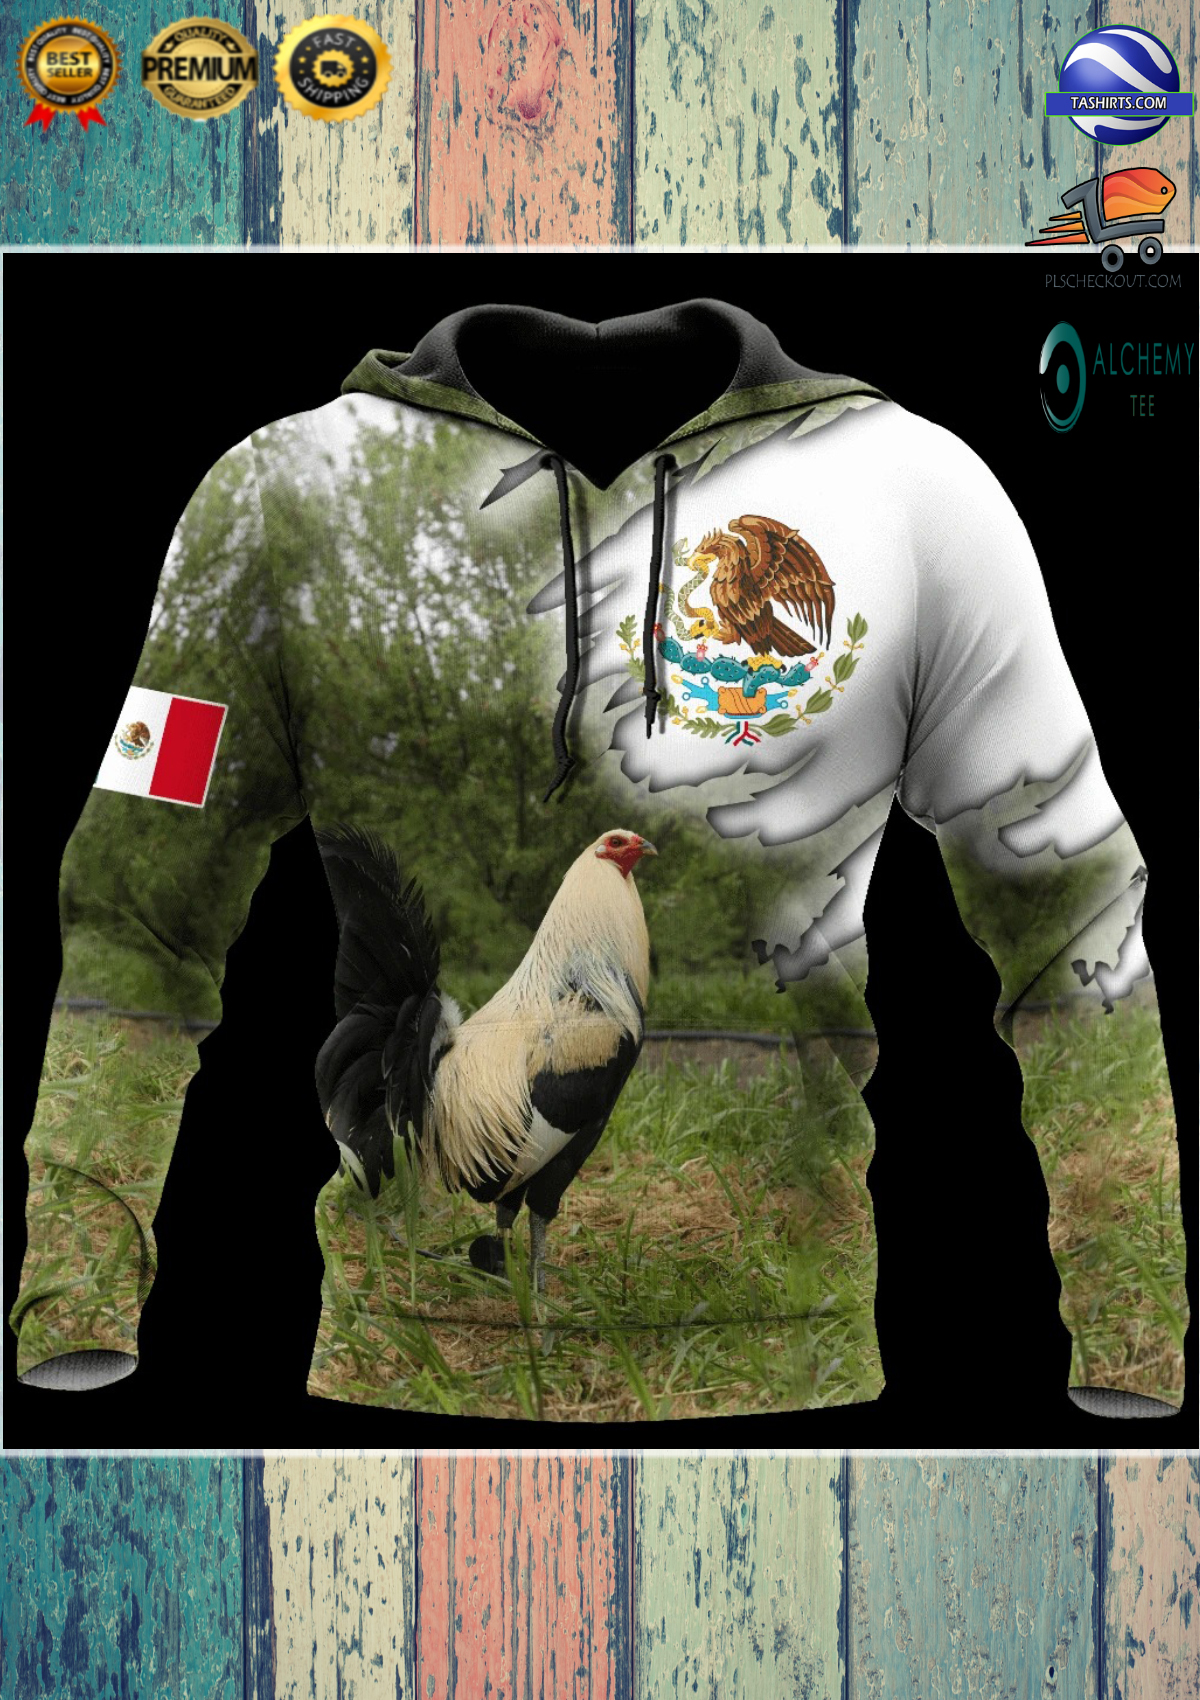 Mexican rooster 3D full printed hoodie and shirts